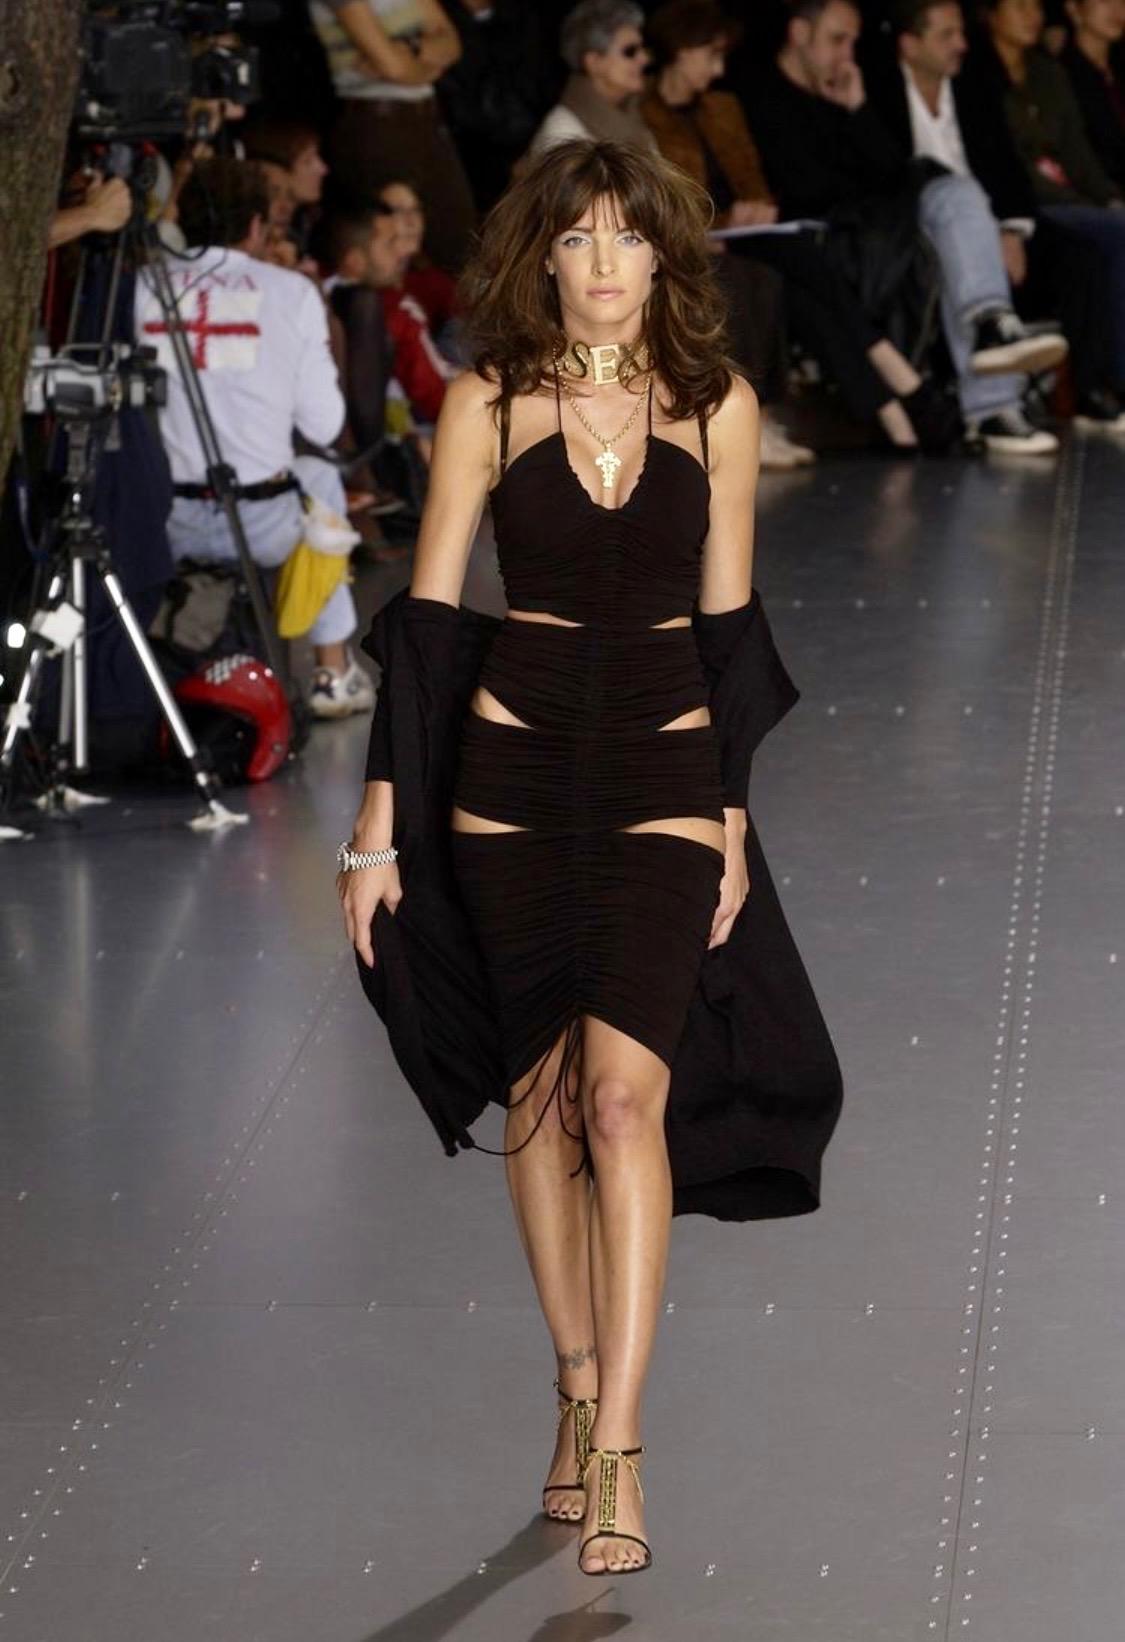 TheRealList presents: a black stretchy cut-out Dolce and Gabbana dress. From the brand's famous Spring/Summer 2003 'Sex and Love' collection, this dress debuted on the season's runway as look number 9 on Stephanie Seymour. This collection was